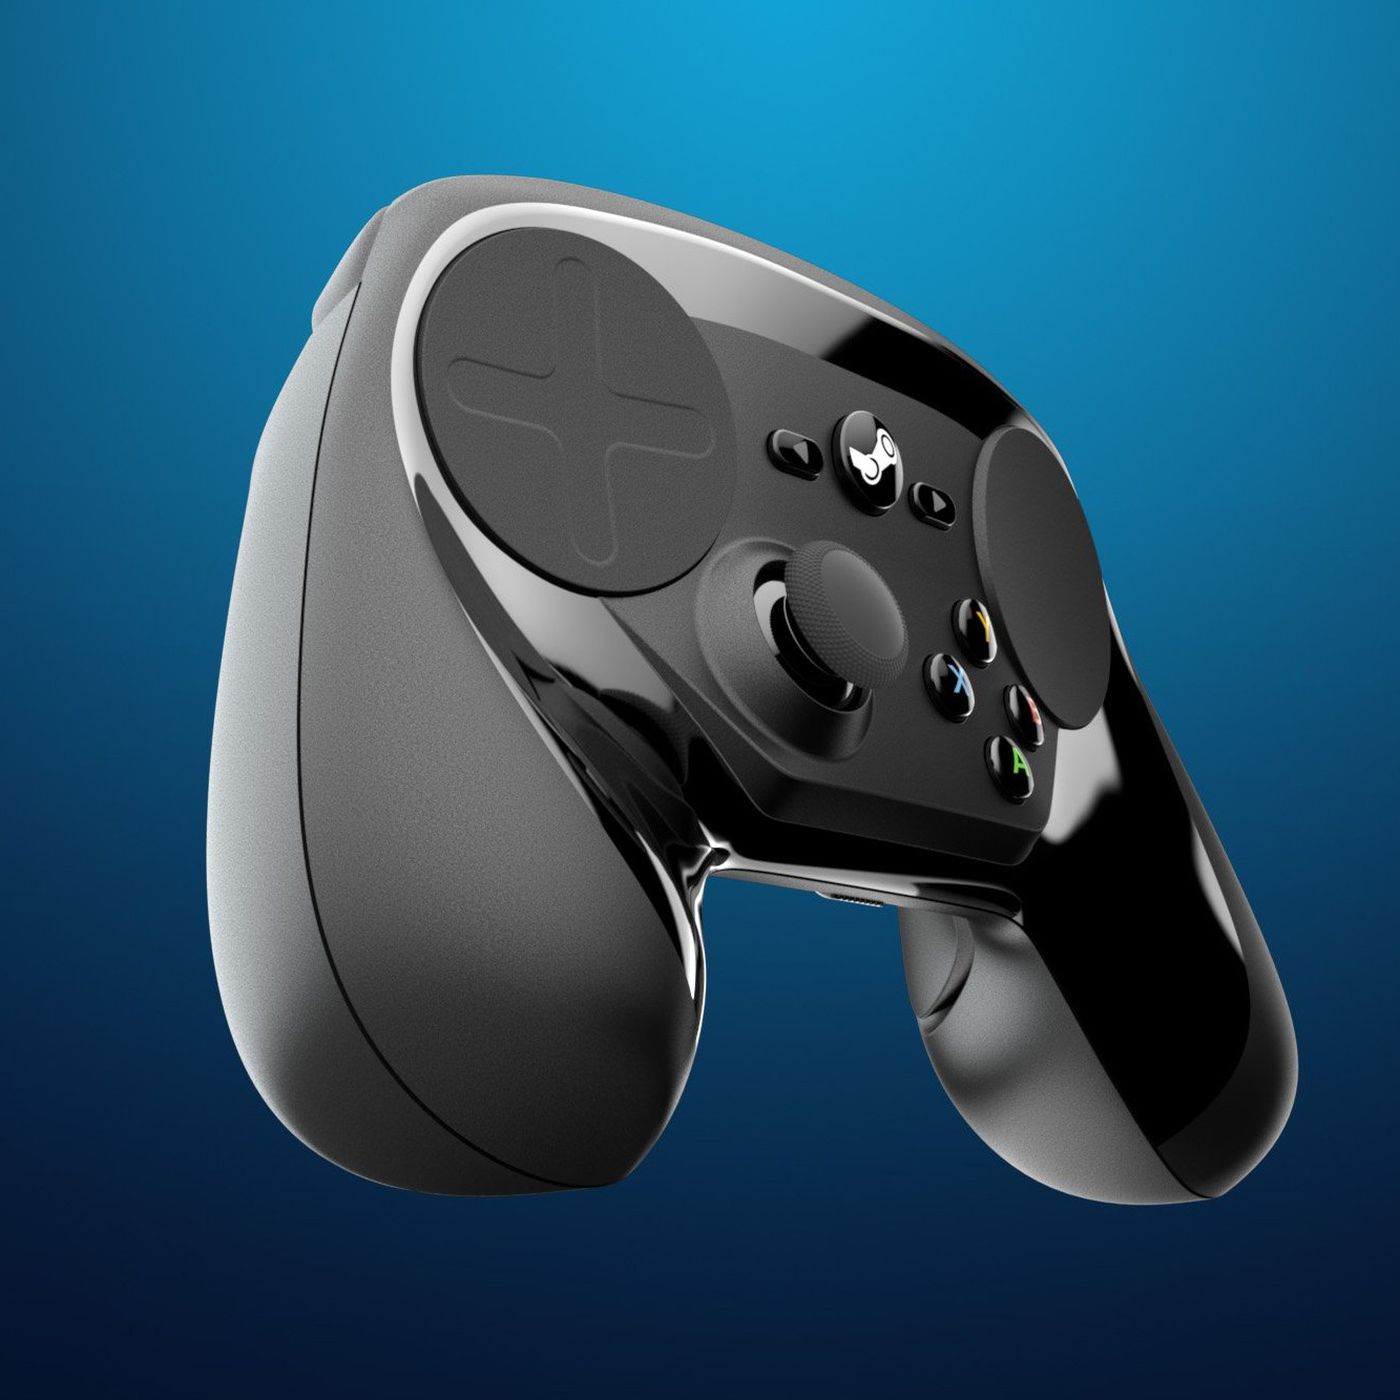 dekorere Udholdenhed Adelaide Pour one out for the Steam Controller, sold out forever after $5 fire sale  - The Verge